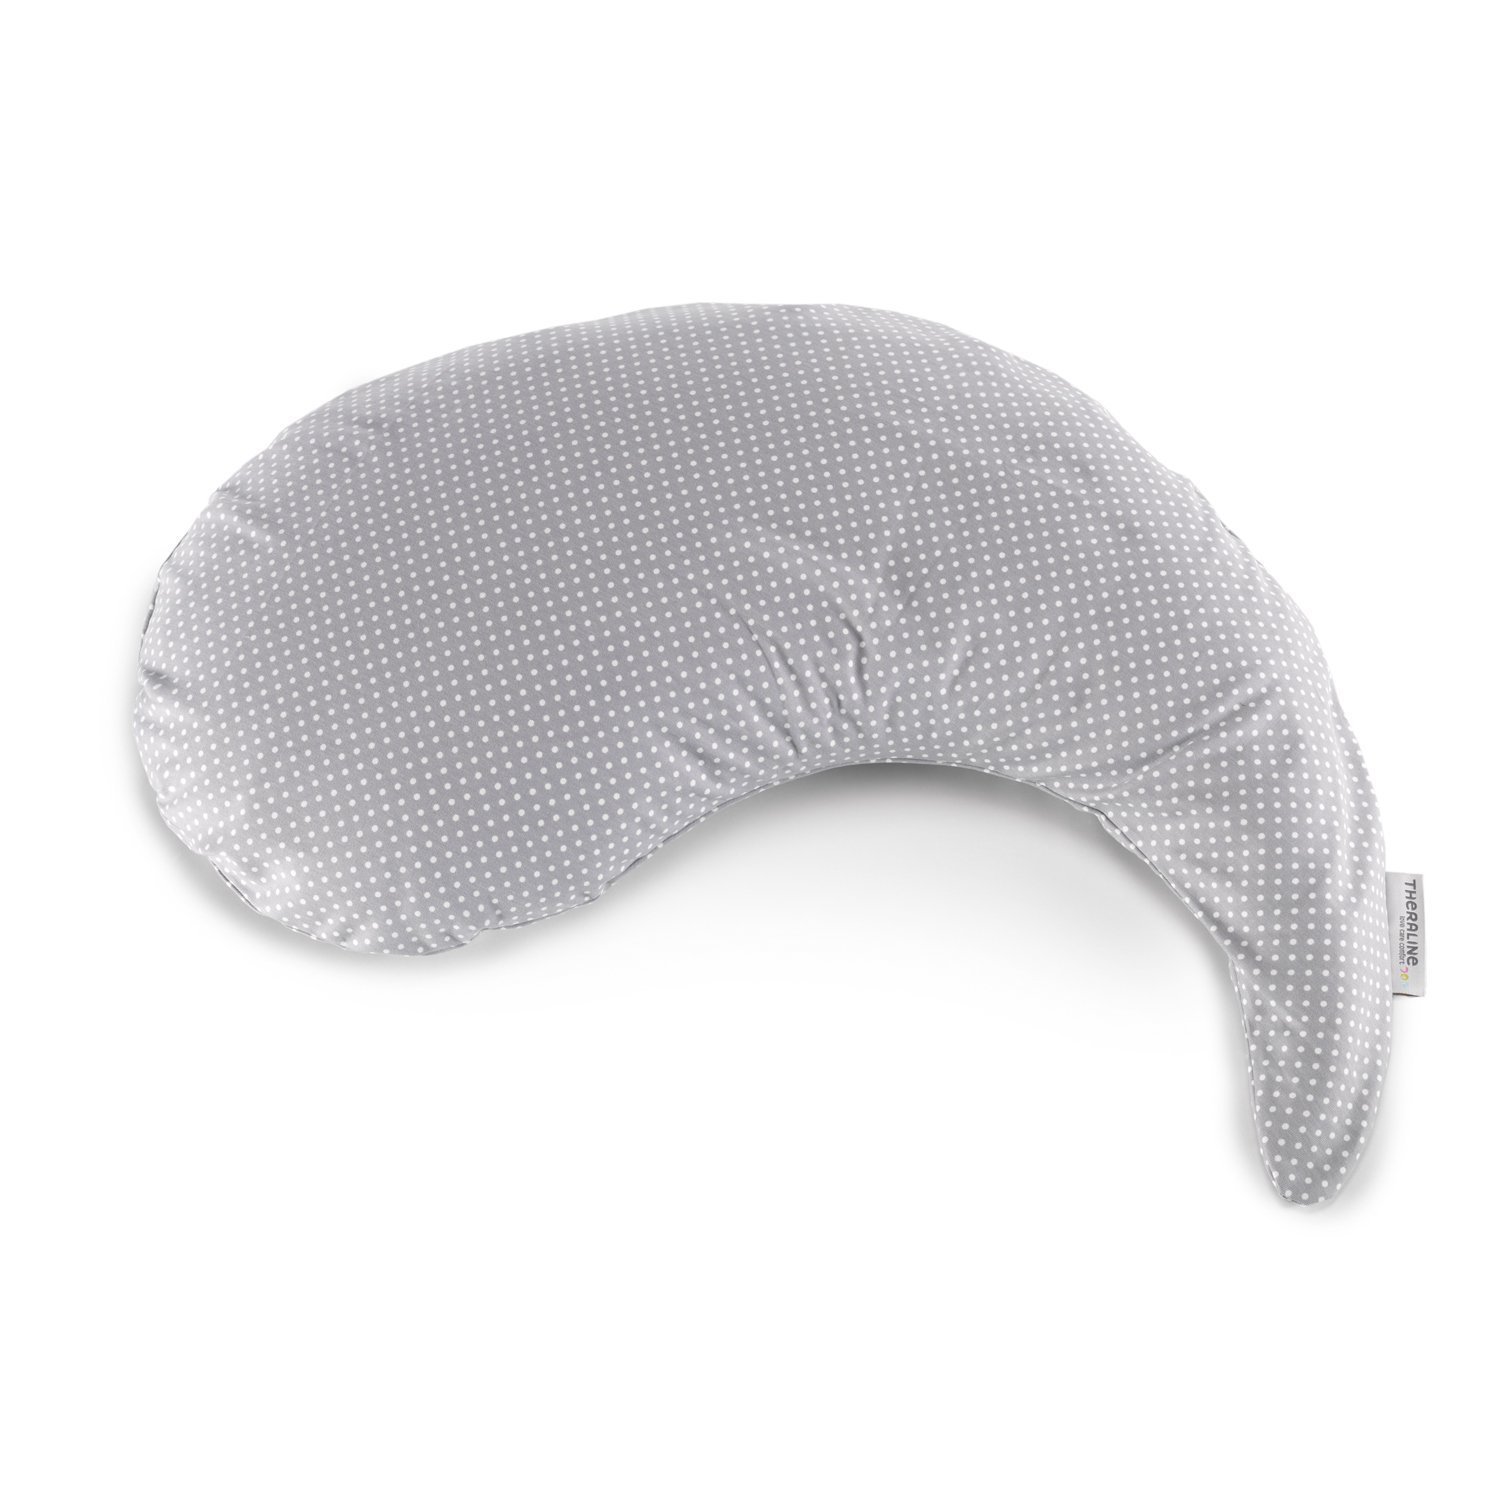 Theraline Yinnie Nursing Pillow with Outer Cover Polka Dots Grey